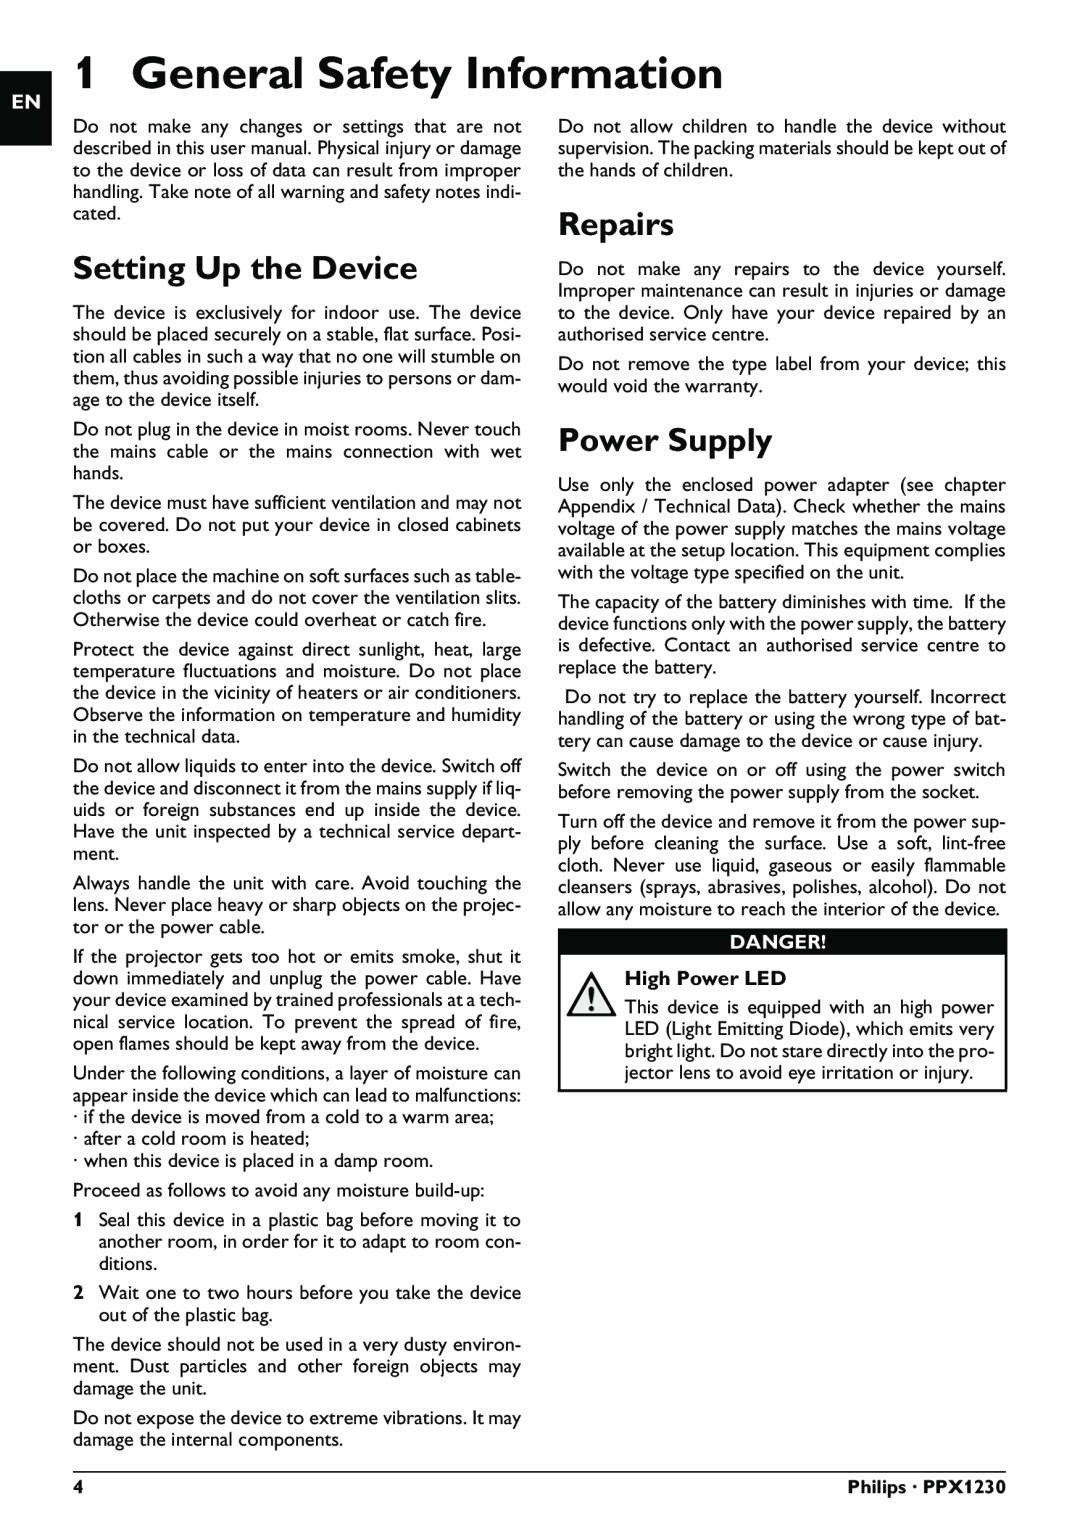 Philips PPX1230 General Safety Information, Setting Up the Device, Repairs, Power Supply, High Power LED, Danger 